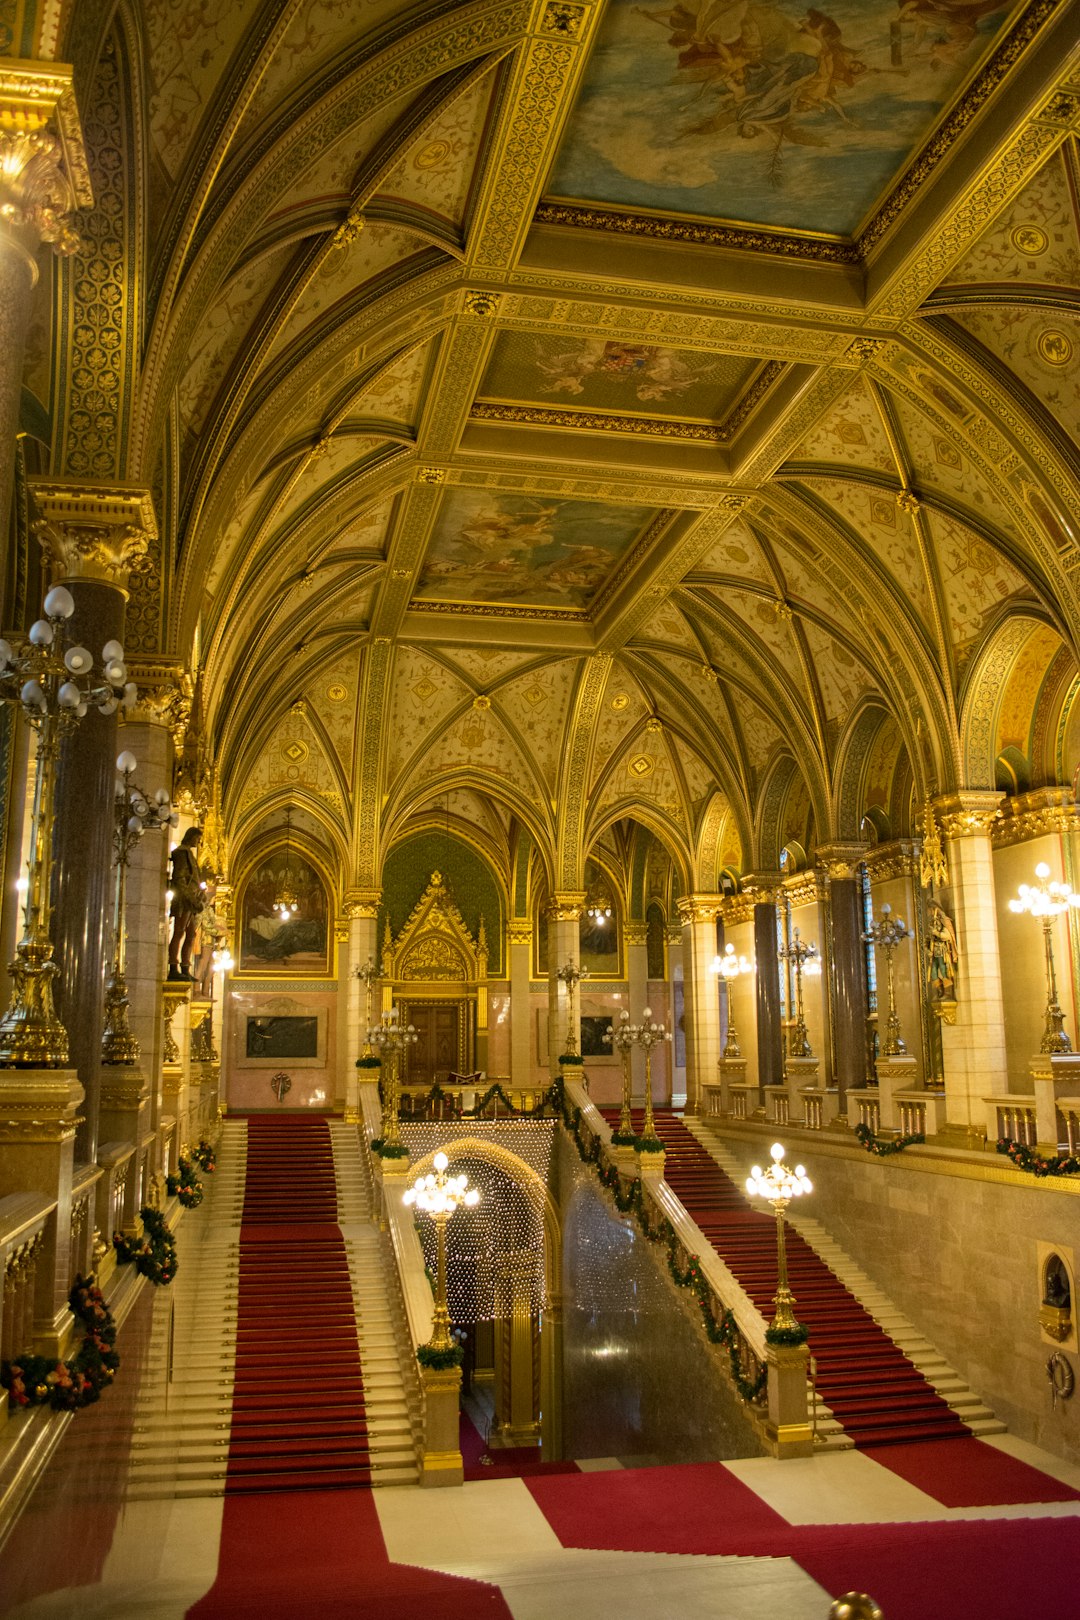 The golden staircase in the Hungarian parliament building in Budapest. This staircase is actually the main staircase of the 268m long building located right at the Danube.